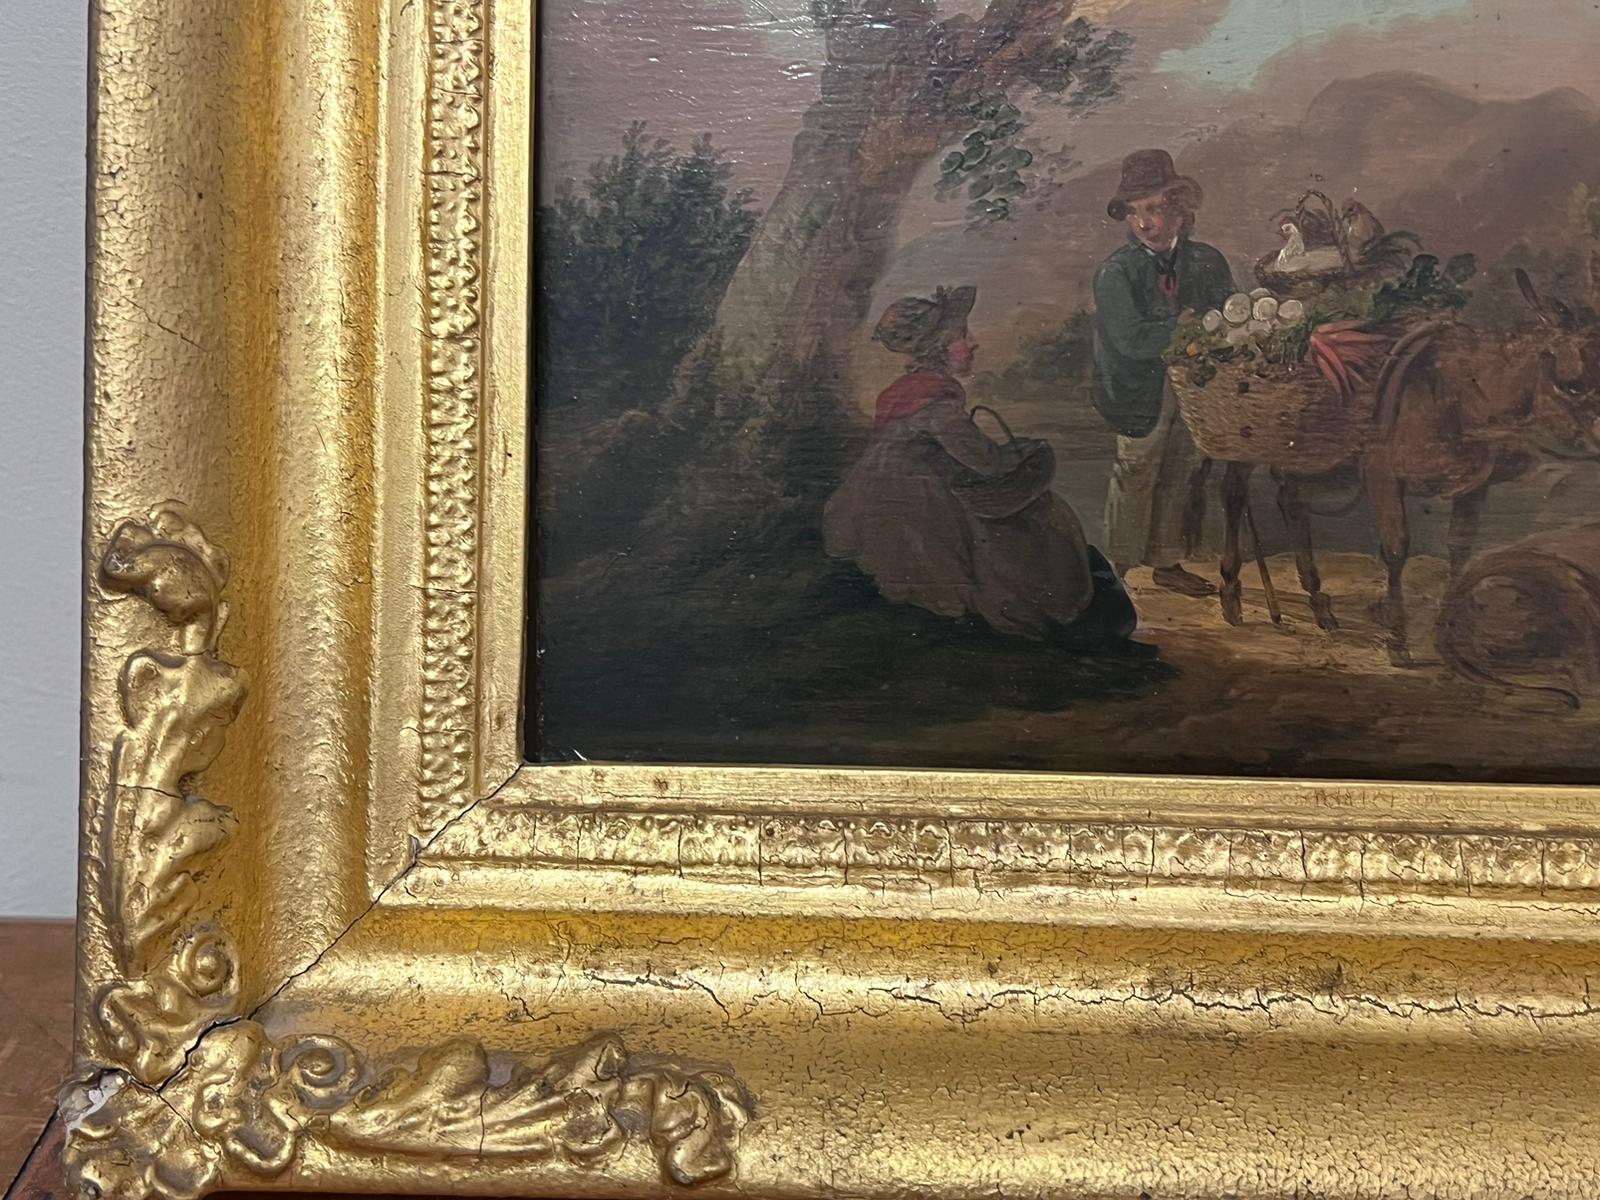 Pausing for Conversation
by peter la Cave (fl. 1789-1816) *see bio below
painting on wood panel, framed
framed: 12.5 x 15 inches
panel: 8 x 10 inches
provenance: private collection, UK
condition: very good and sound condition